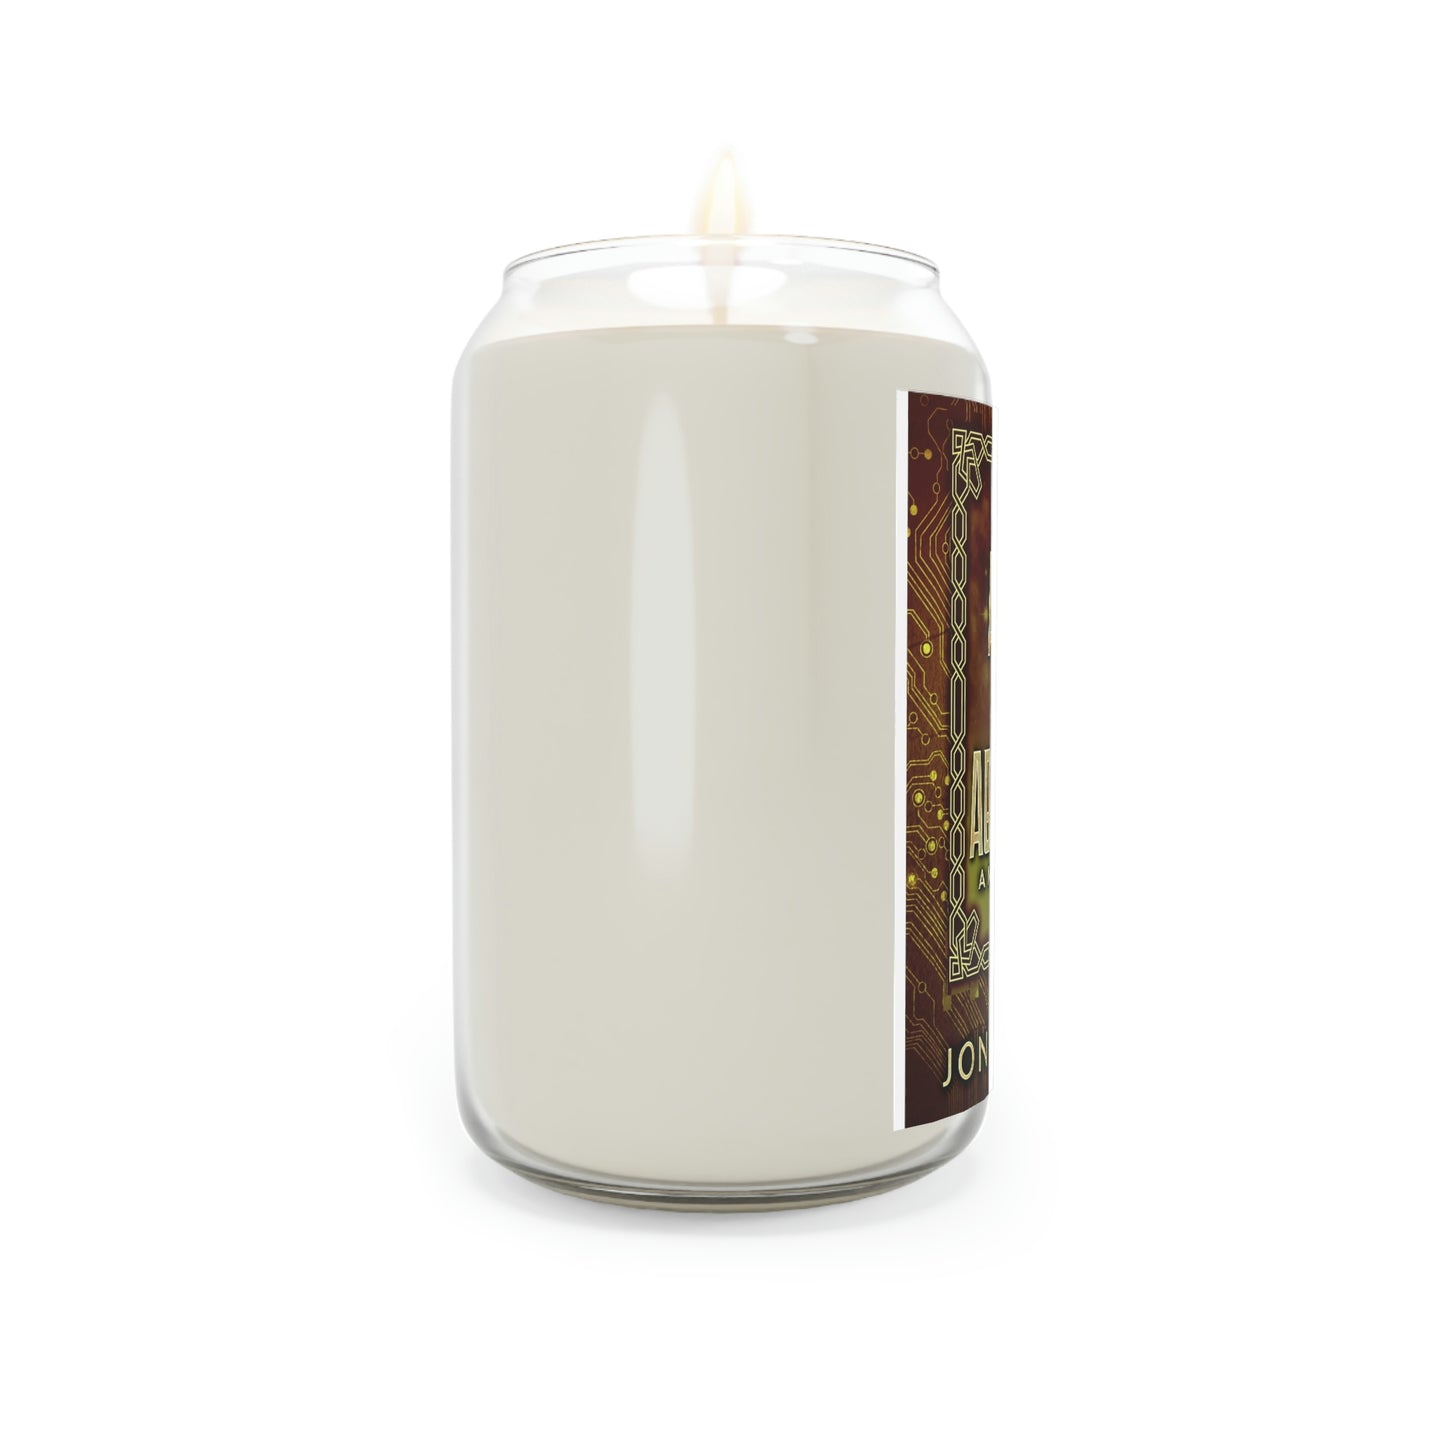 Athena - Of The Abandoned - Scented Candle